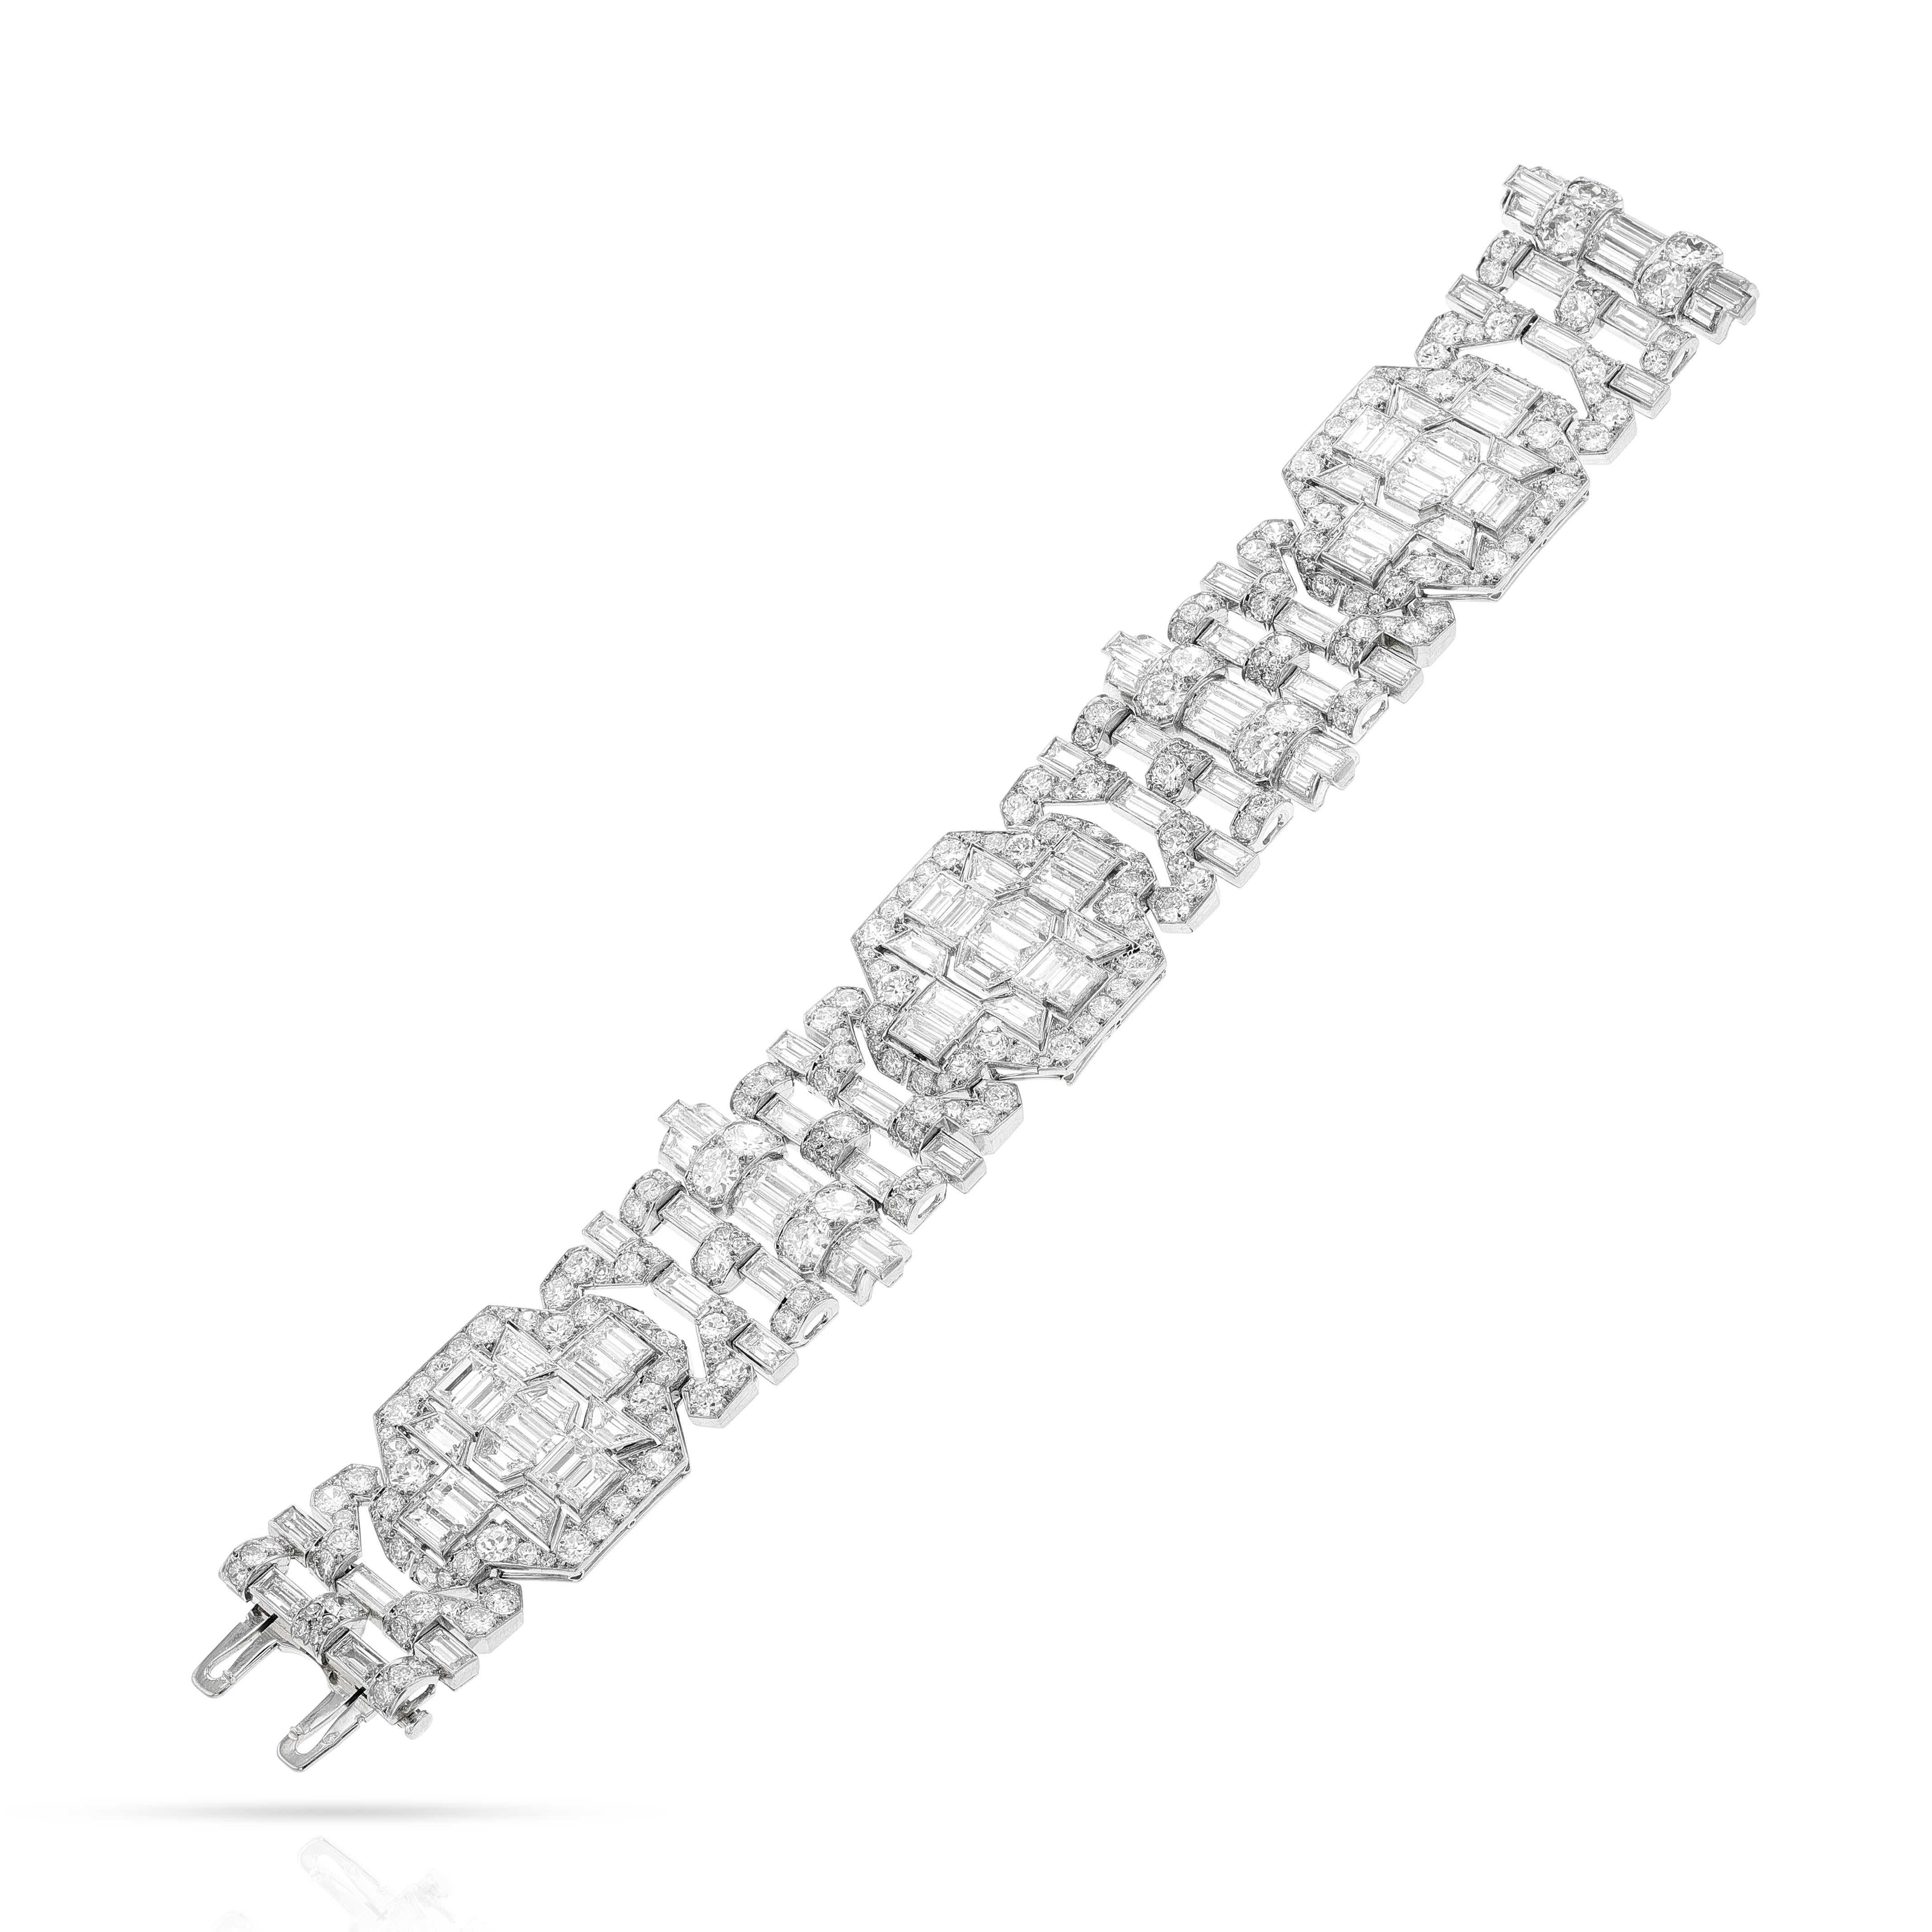 Mauboussin Paris Art Deco Diamond and Platinum Bracelet. The diamonds weigh appx. 40-50 carats. The length is 7 inches. The total weight is 68.60 grams-. The width ranges from 0.80 inches to 1 inch throughout the bracelet.